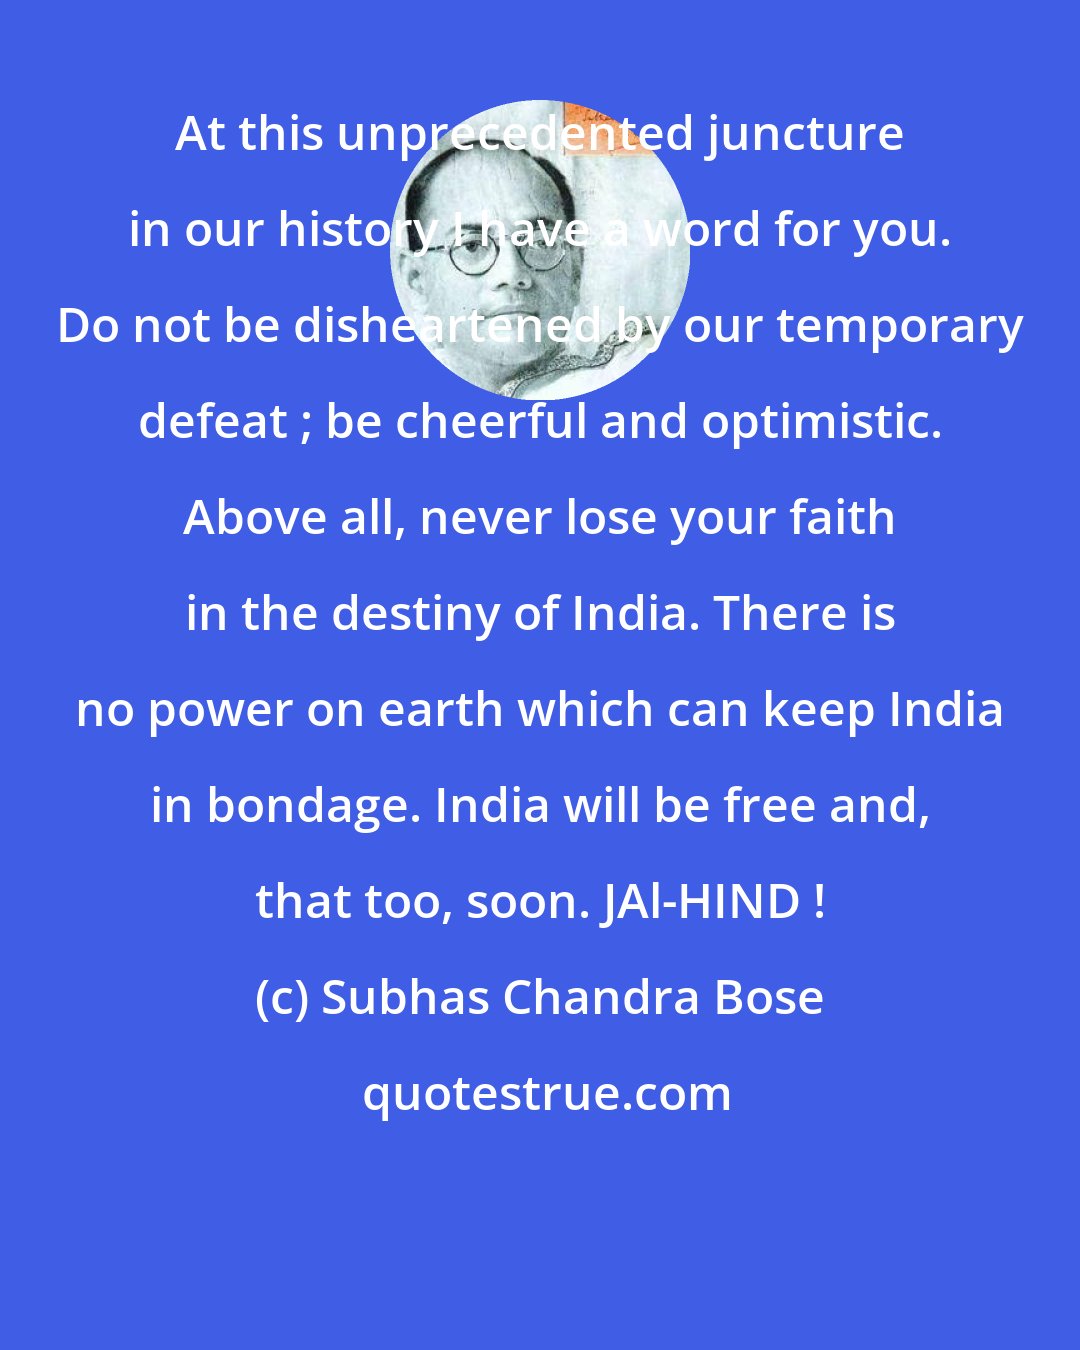 Subhas Chandra Bose: At this unprecedented juncture in our history I have a word for you. Do not be disheartened by our temporary defeat ; be cheerful and optimistic. Above all, never lose your faith in the destiny of India. There is no power on earth which can keep India in bondage. India will be free and, that too, soon. JAl-HIND !